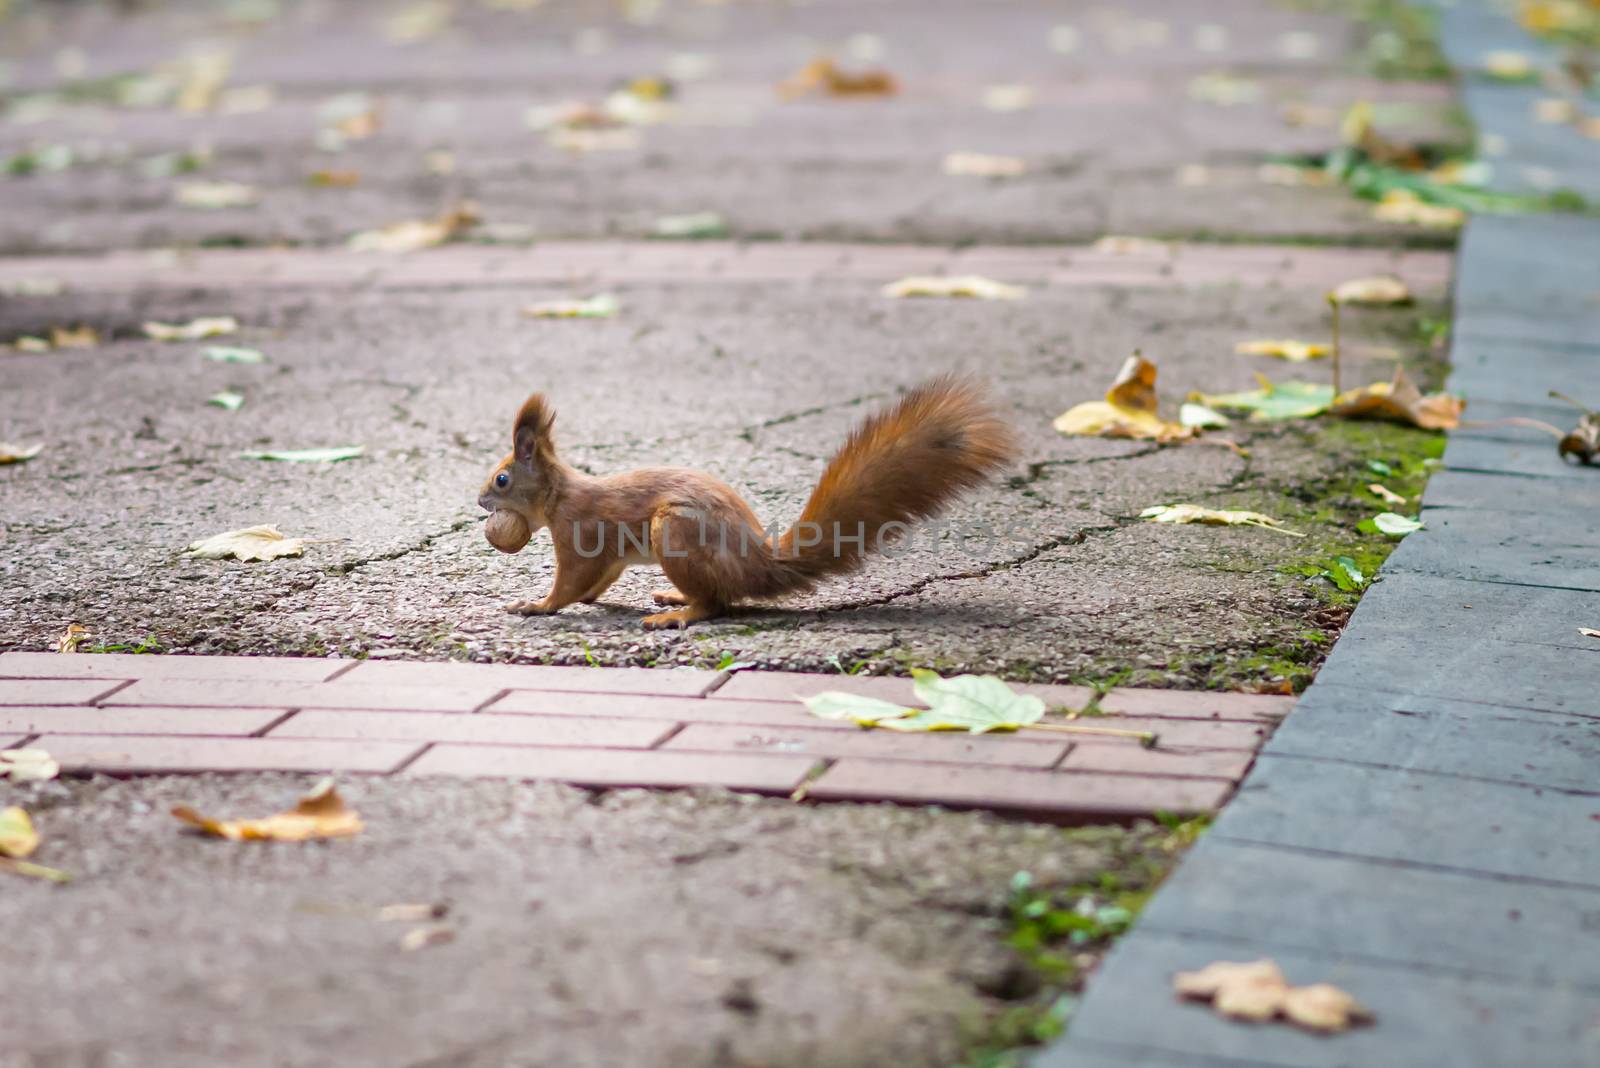 Red squirrel holding a nut in his mouth in the autumn park